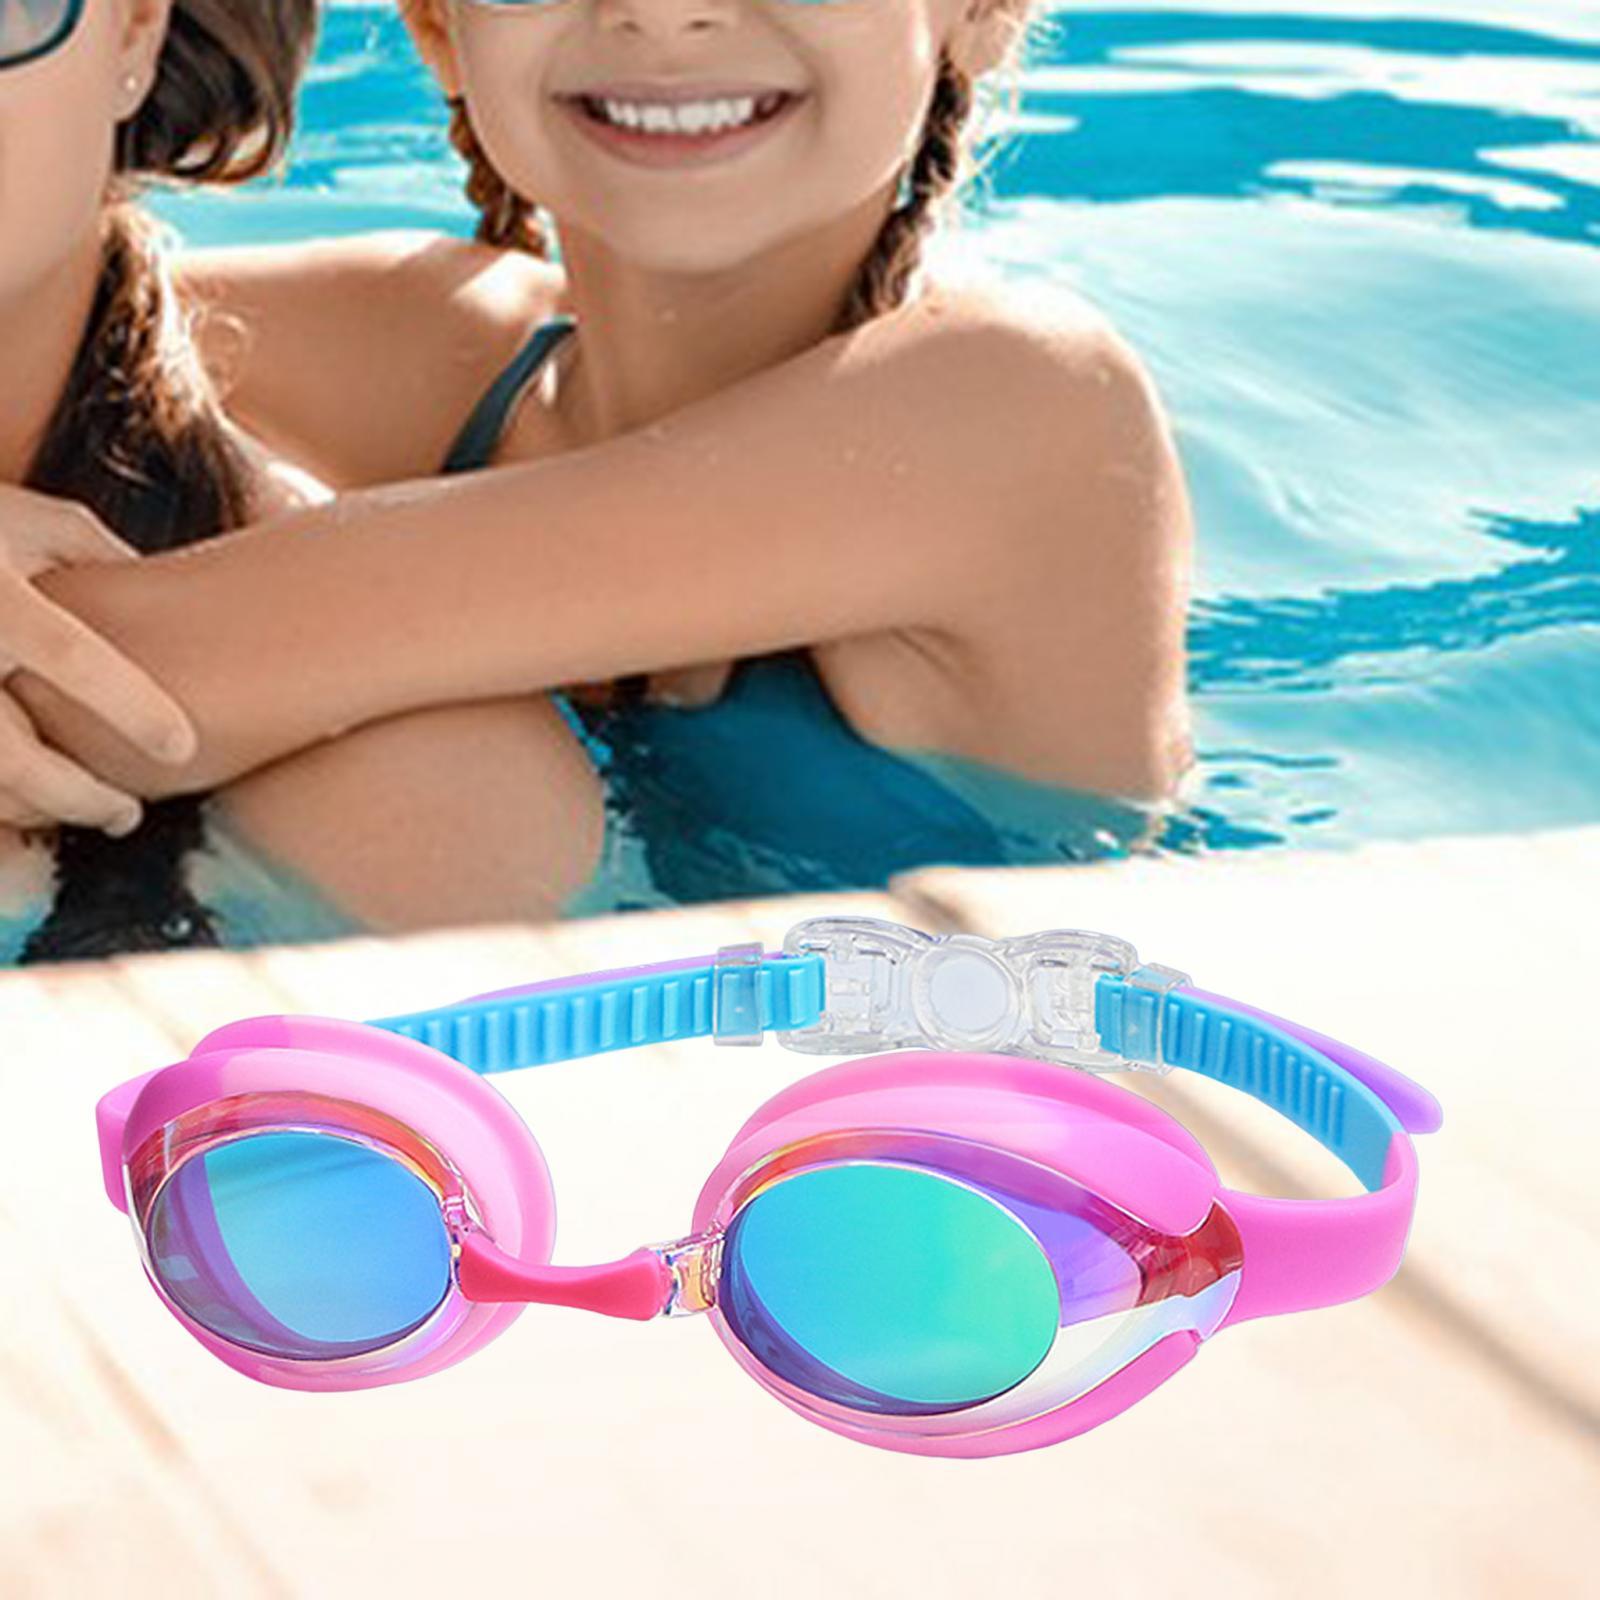 Swimming Goggles Comfortable No Leaking Clear Vision Boys Girls Swim Goggles Electroplate Pink